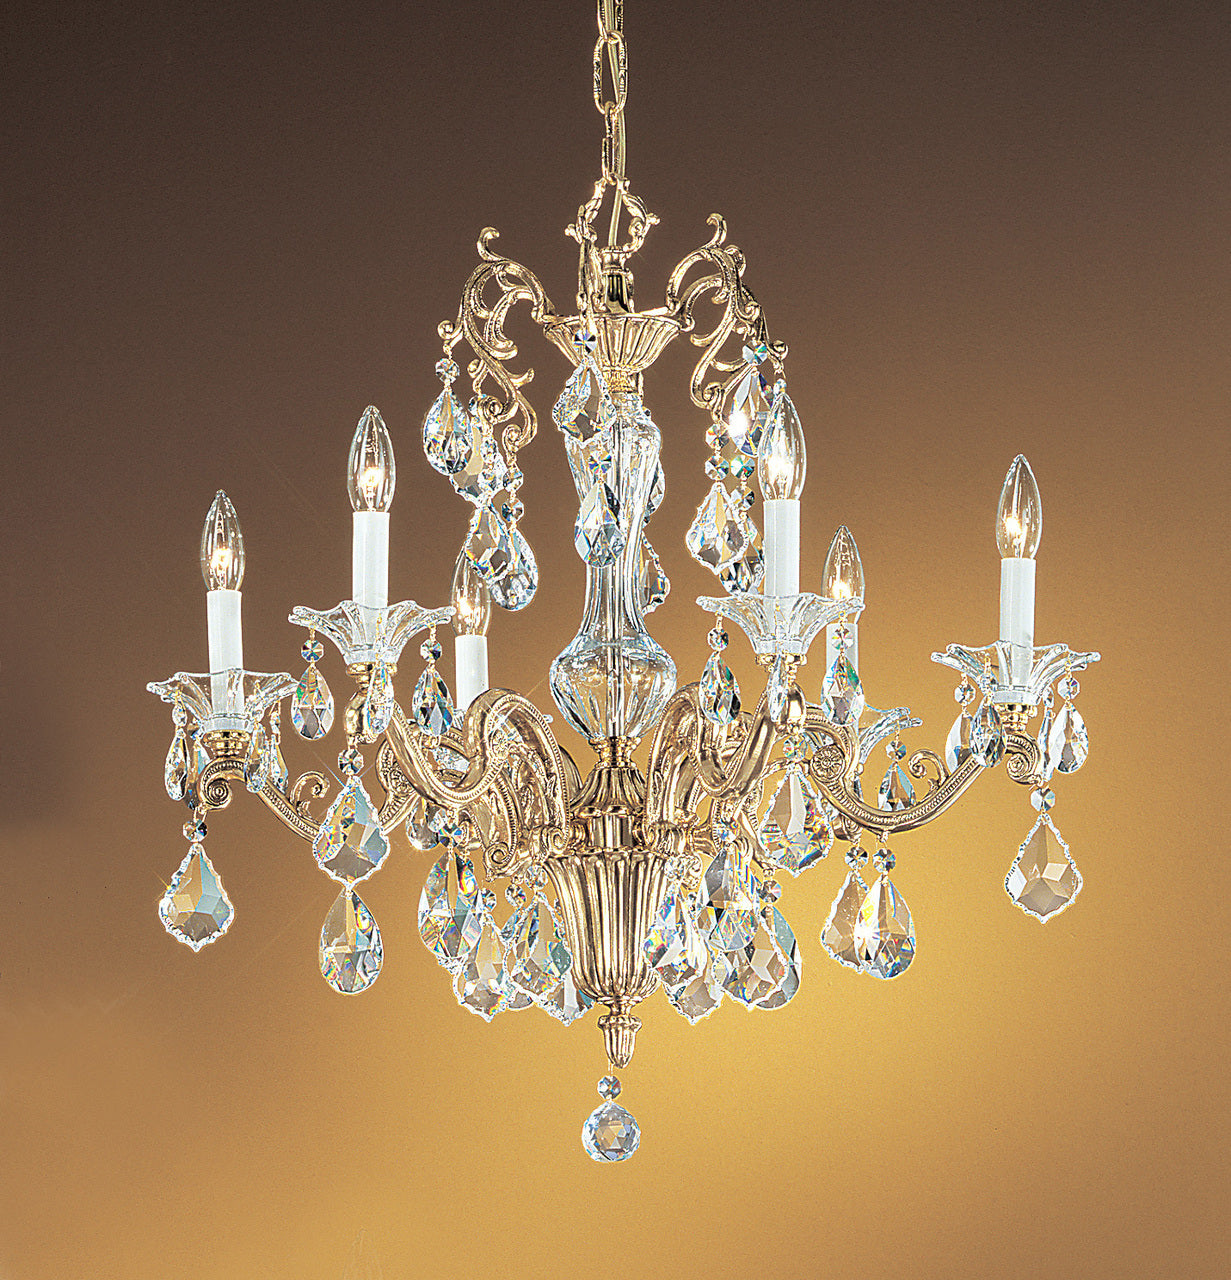 Classic Lighting 57106 BBK S Via Firenze Crystal Chandelier in Bronze/Black Patina (Imported from Spain)